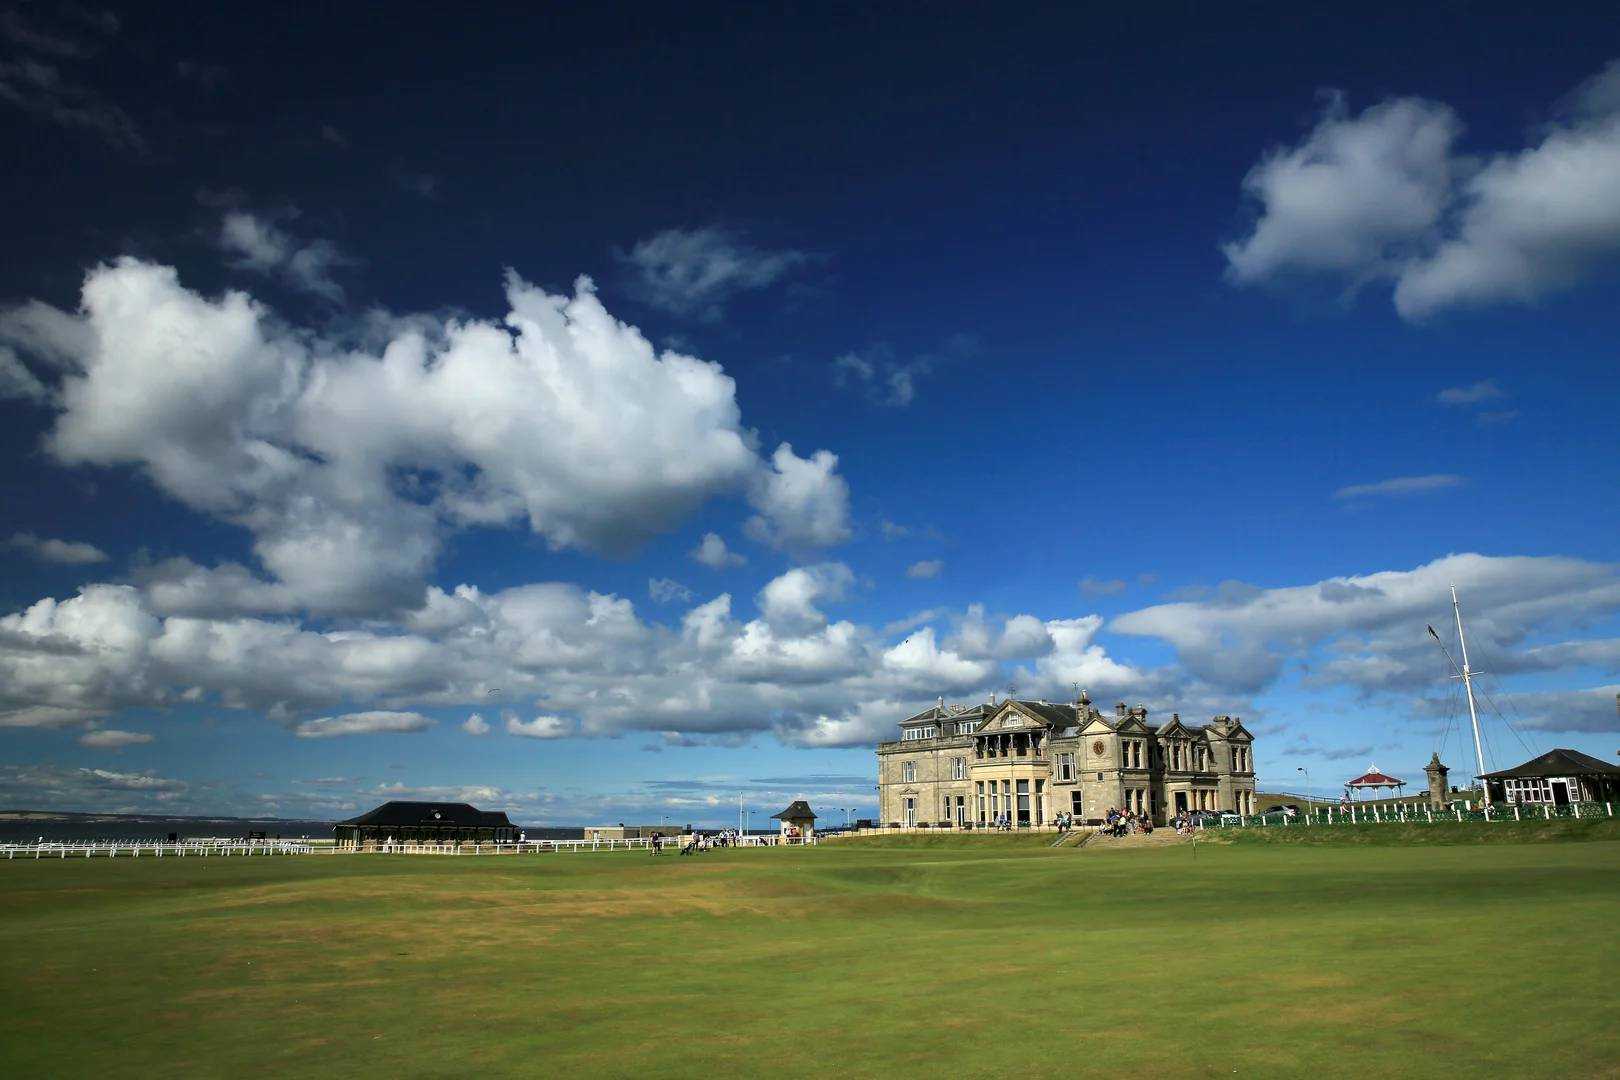 The Royal and Ancient Golf Club of St. Andrews